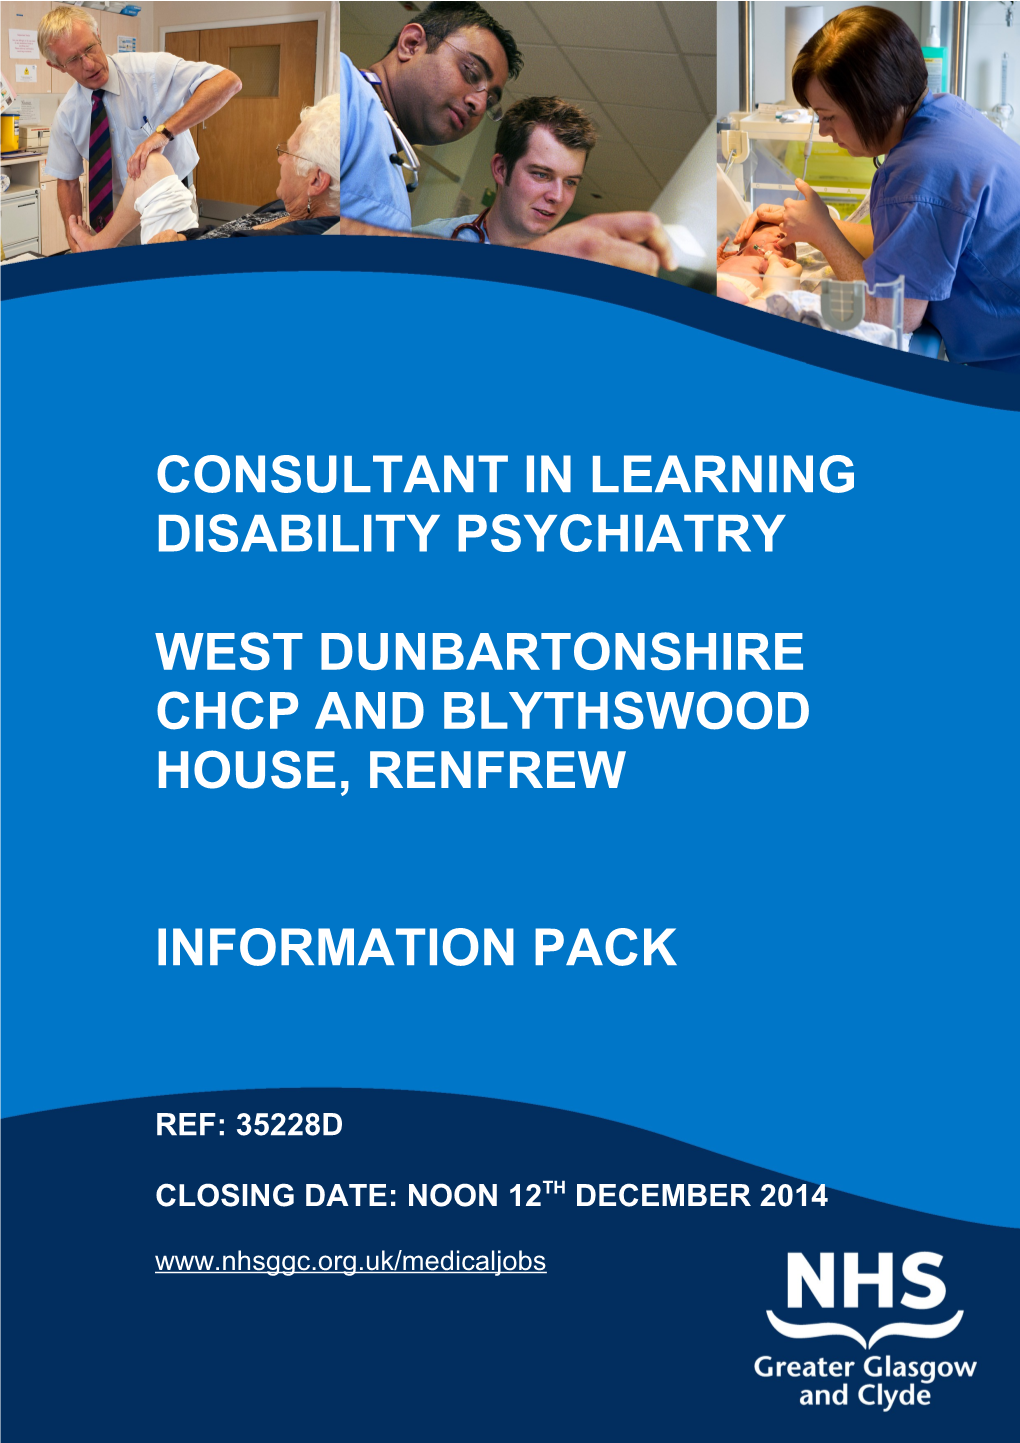 CONSULTANT in Learning Disability Psychiatry